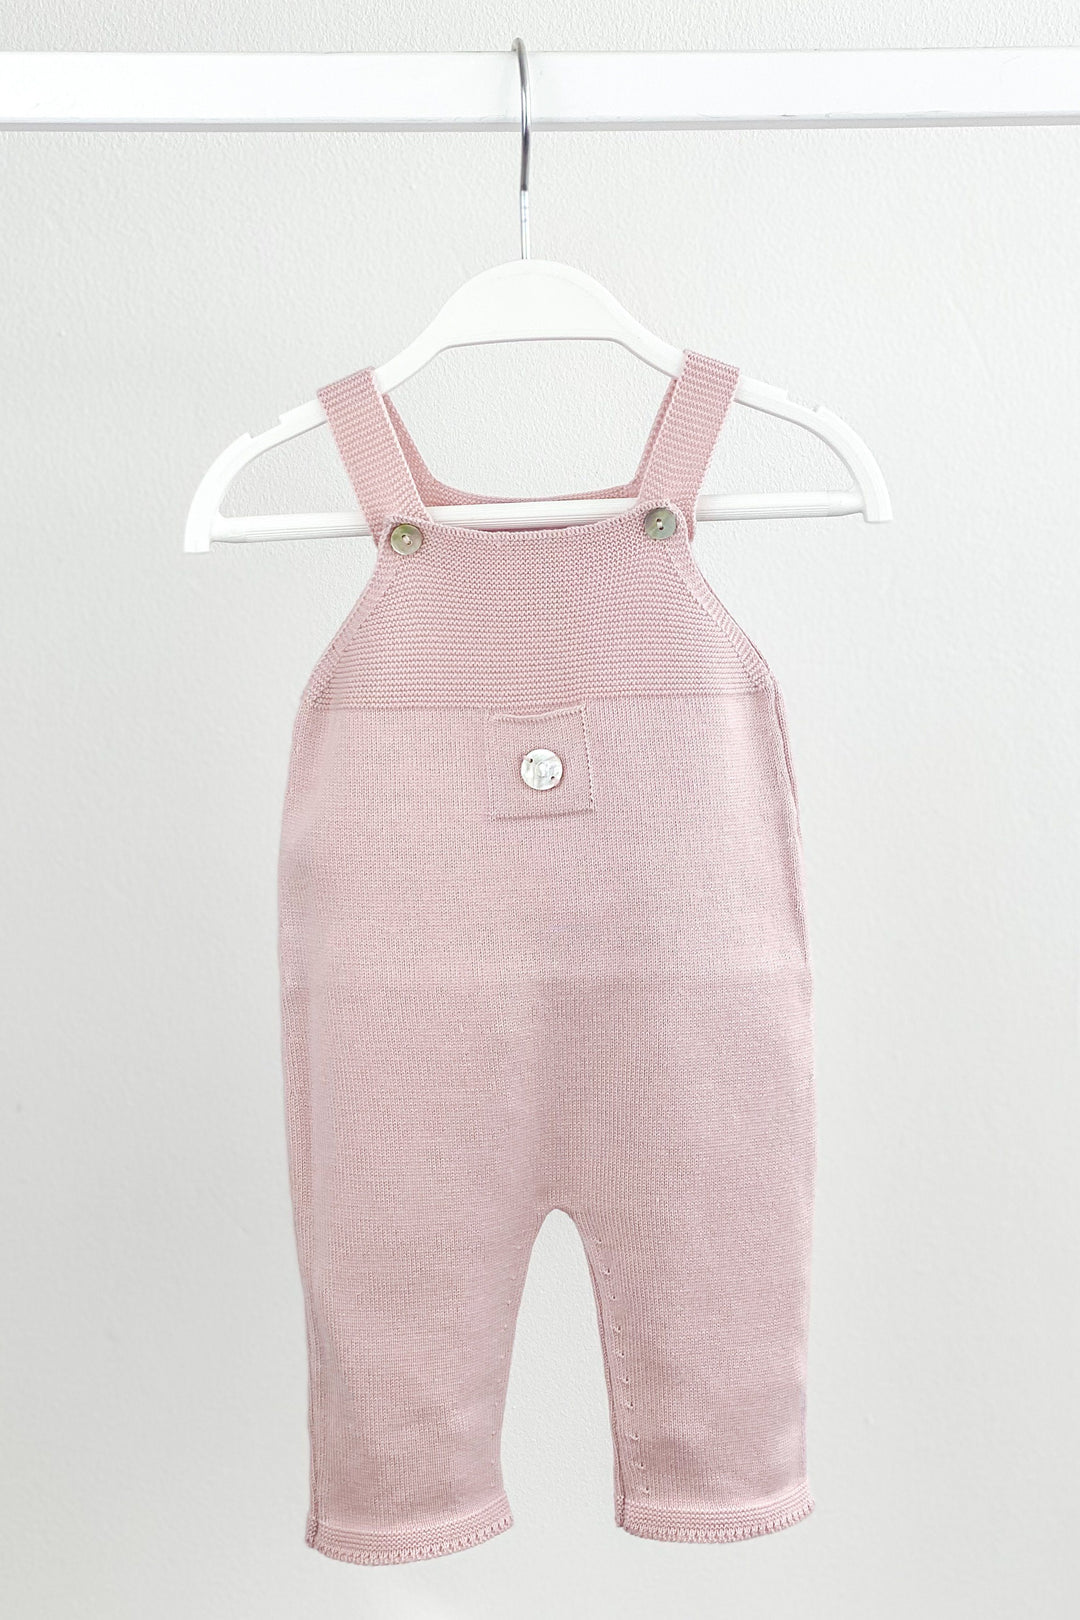 Granlei Classic Knitted Dungarees - Pale Rose | Millie and John